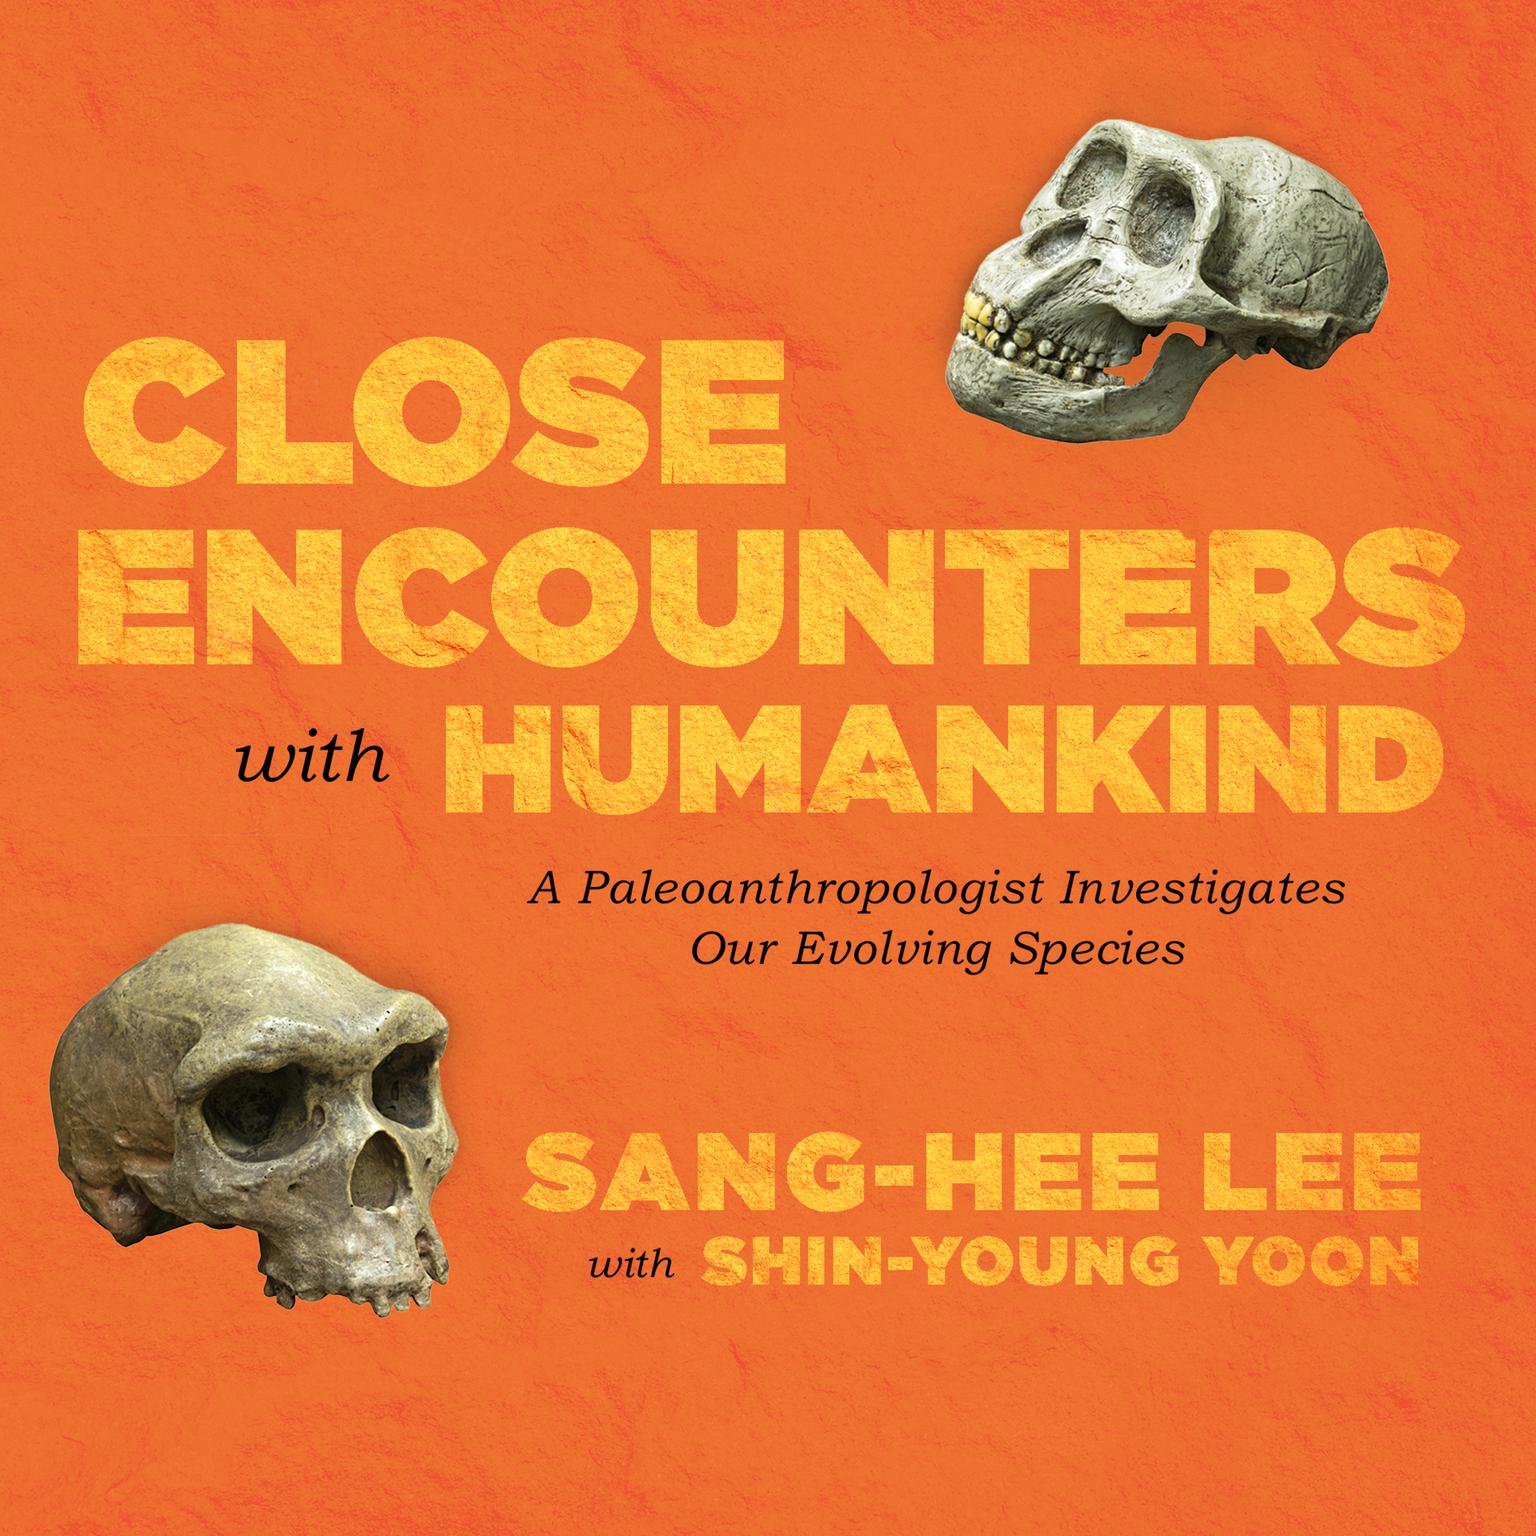 Close Encounters with Humankind: A Paleoanthropologist Investigates Our Evolving Species Audiobook, by Sang-Hee Lee